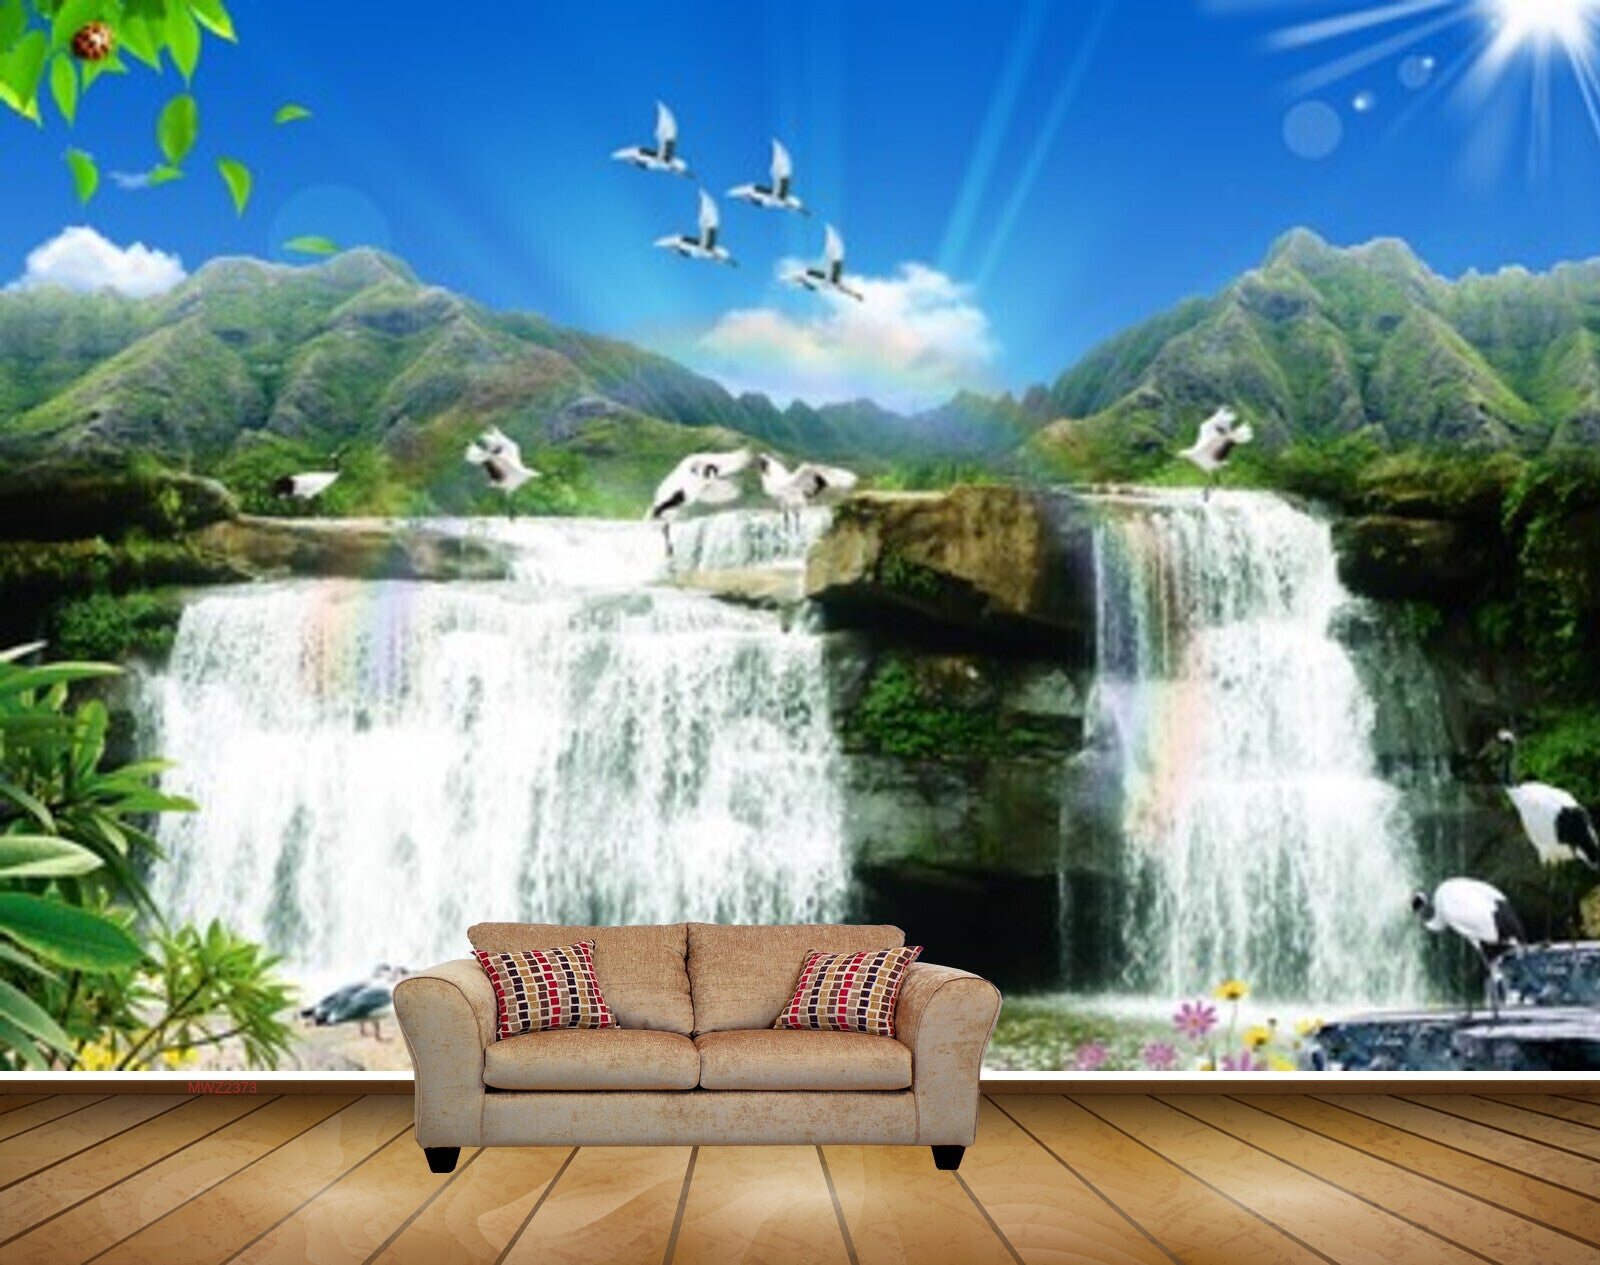 Buy Rks Enterprises Wallpaper Designs Waterfall Inspired Art of Natural  Water Fall Beautiful Wallpaper Sticker Online at Low Prices in India   Amazonin